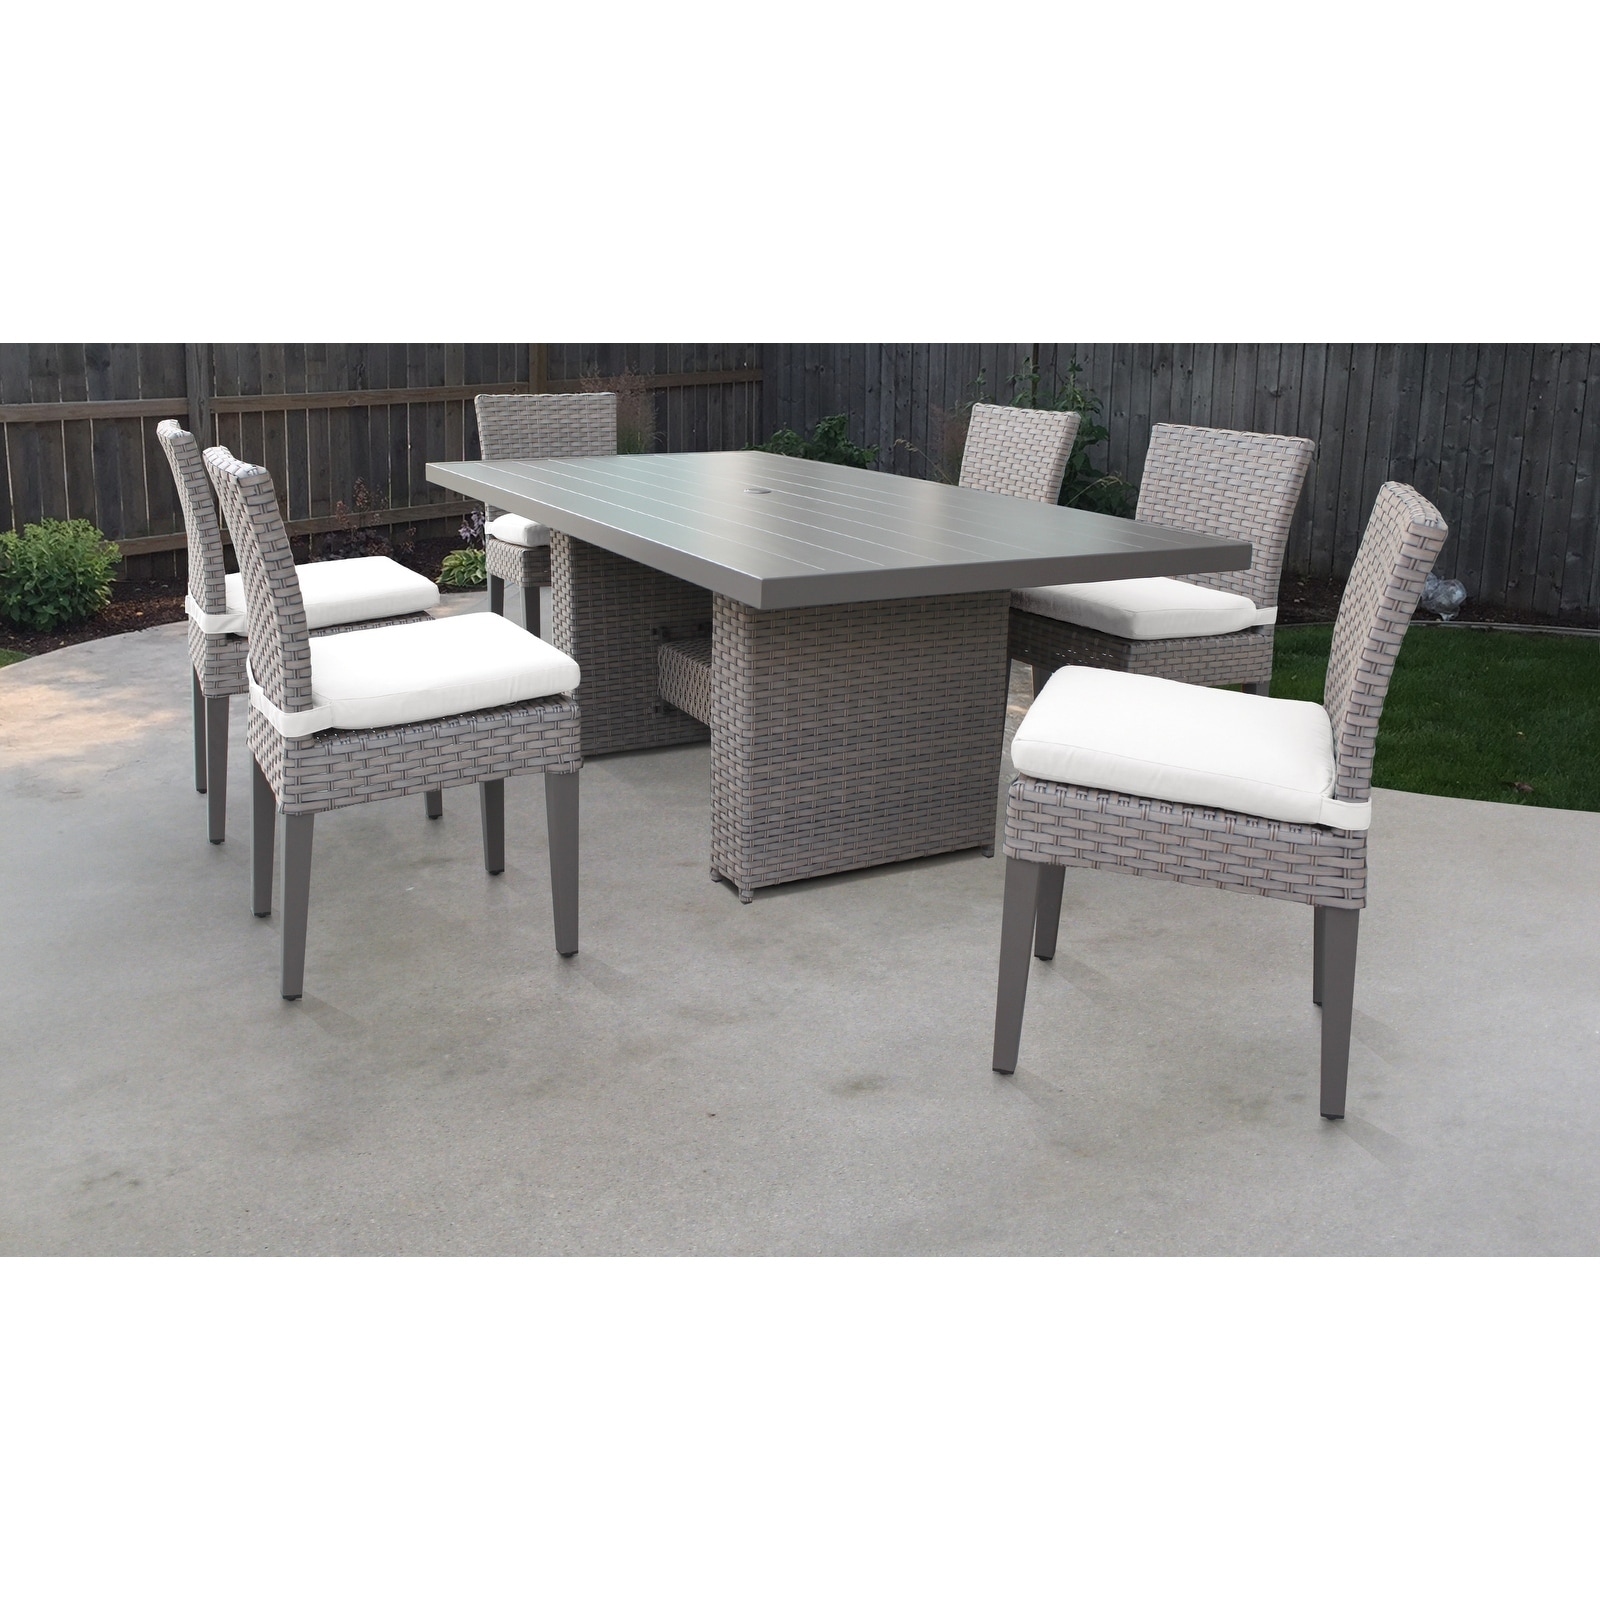 Monterey Rectangular Outdoor Patio Dining Table With 6 Armless Chairs